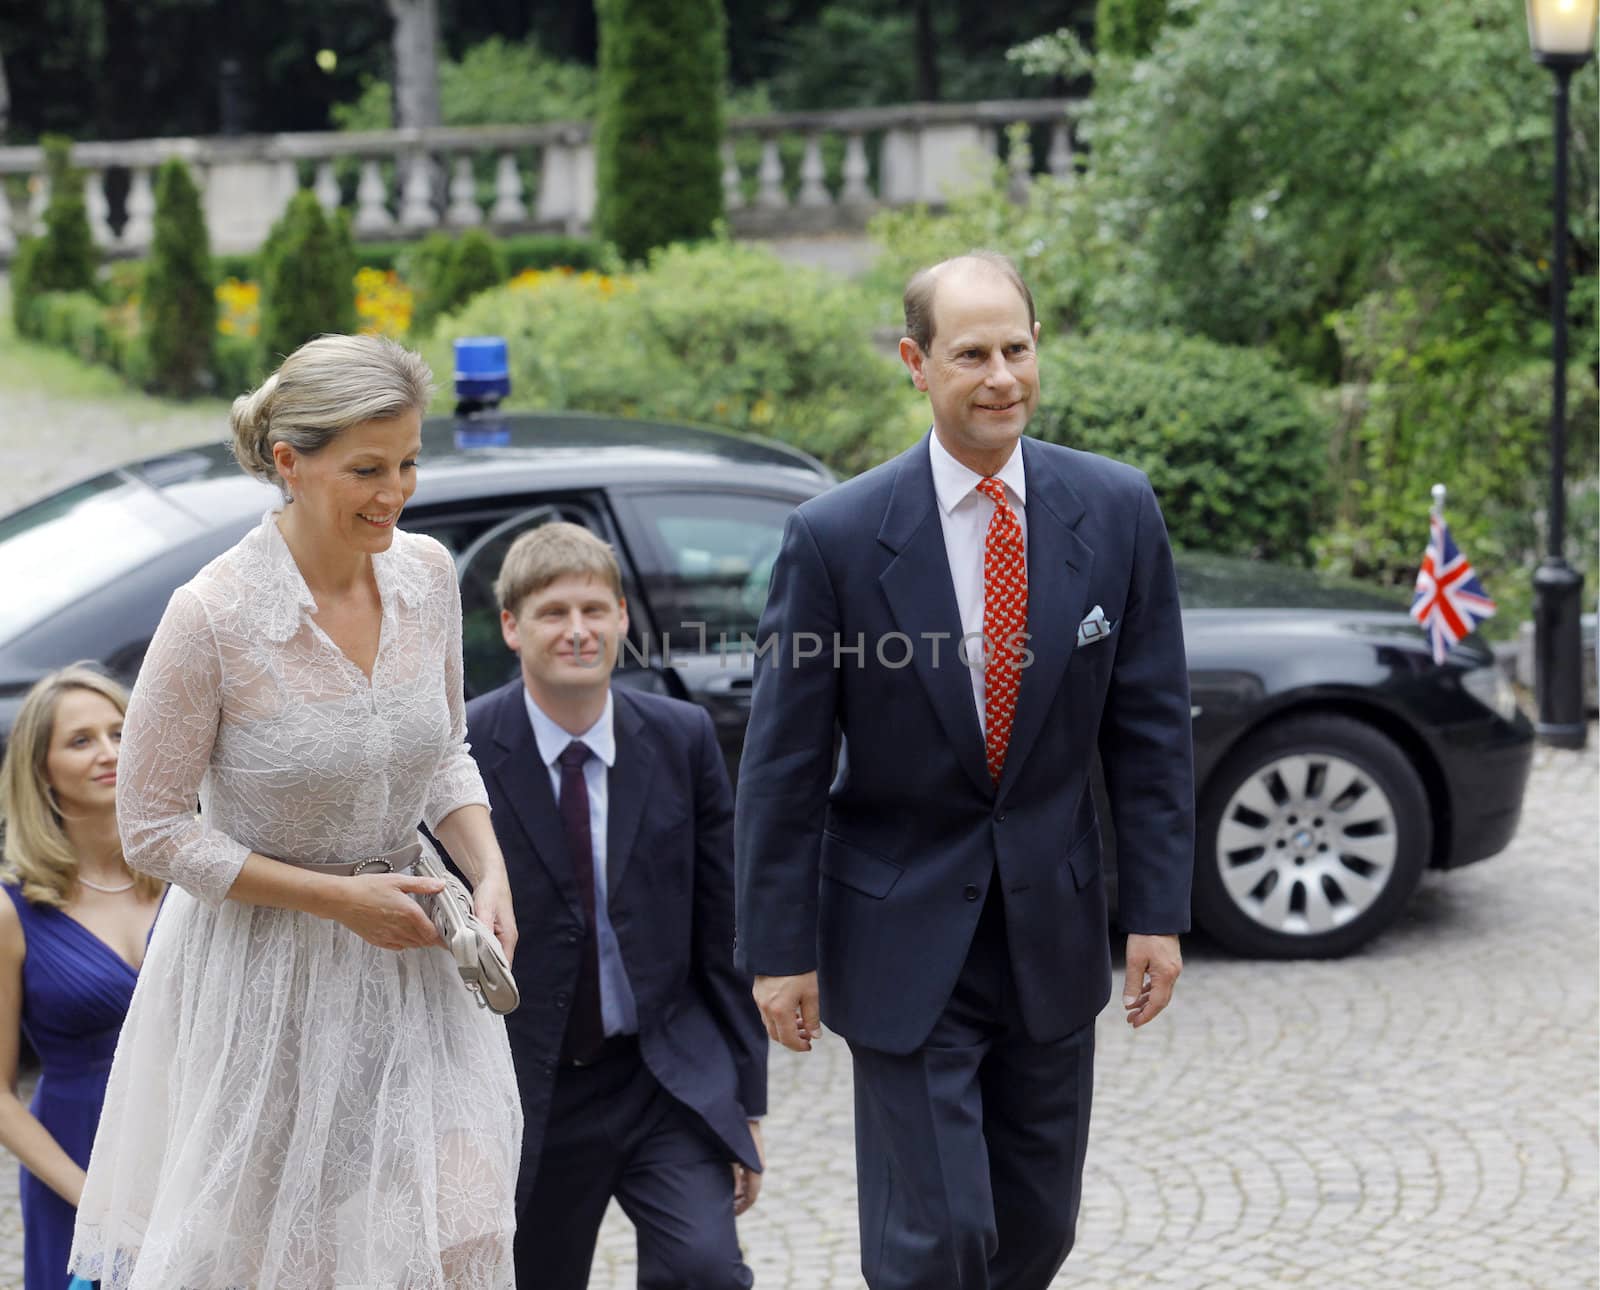 SOFIA, BULGARIA - JUNE 23: His Royal Highness The Prince Edward, Earl of Wessex (R) with his wife, Sophie, Countess of Wessex (L) arives in "Losenez" residence on a visit with bulgarian president Rosen Plevneliev in Sofia, Bulgaria - June 23, 2013 .